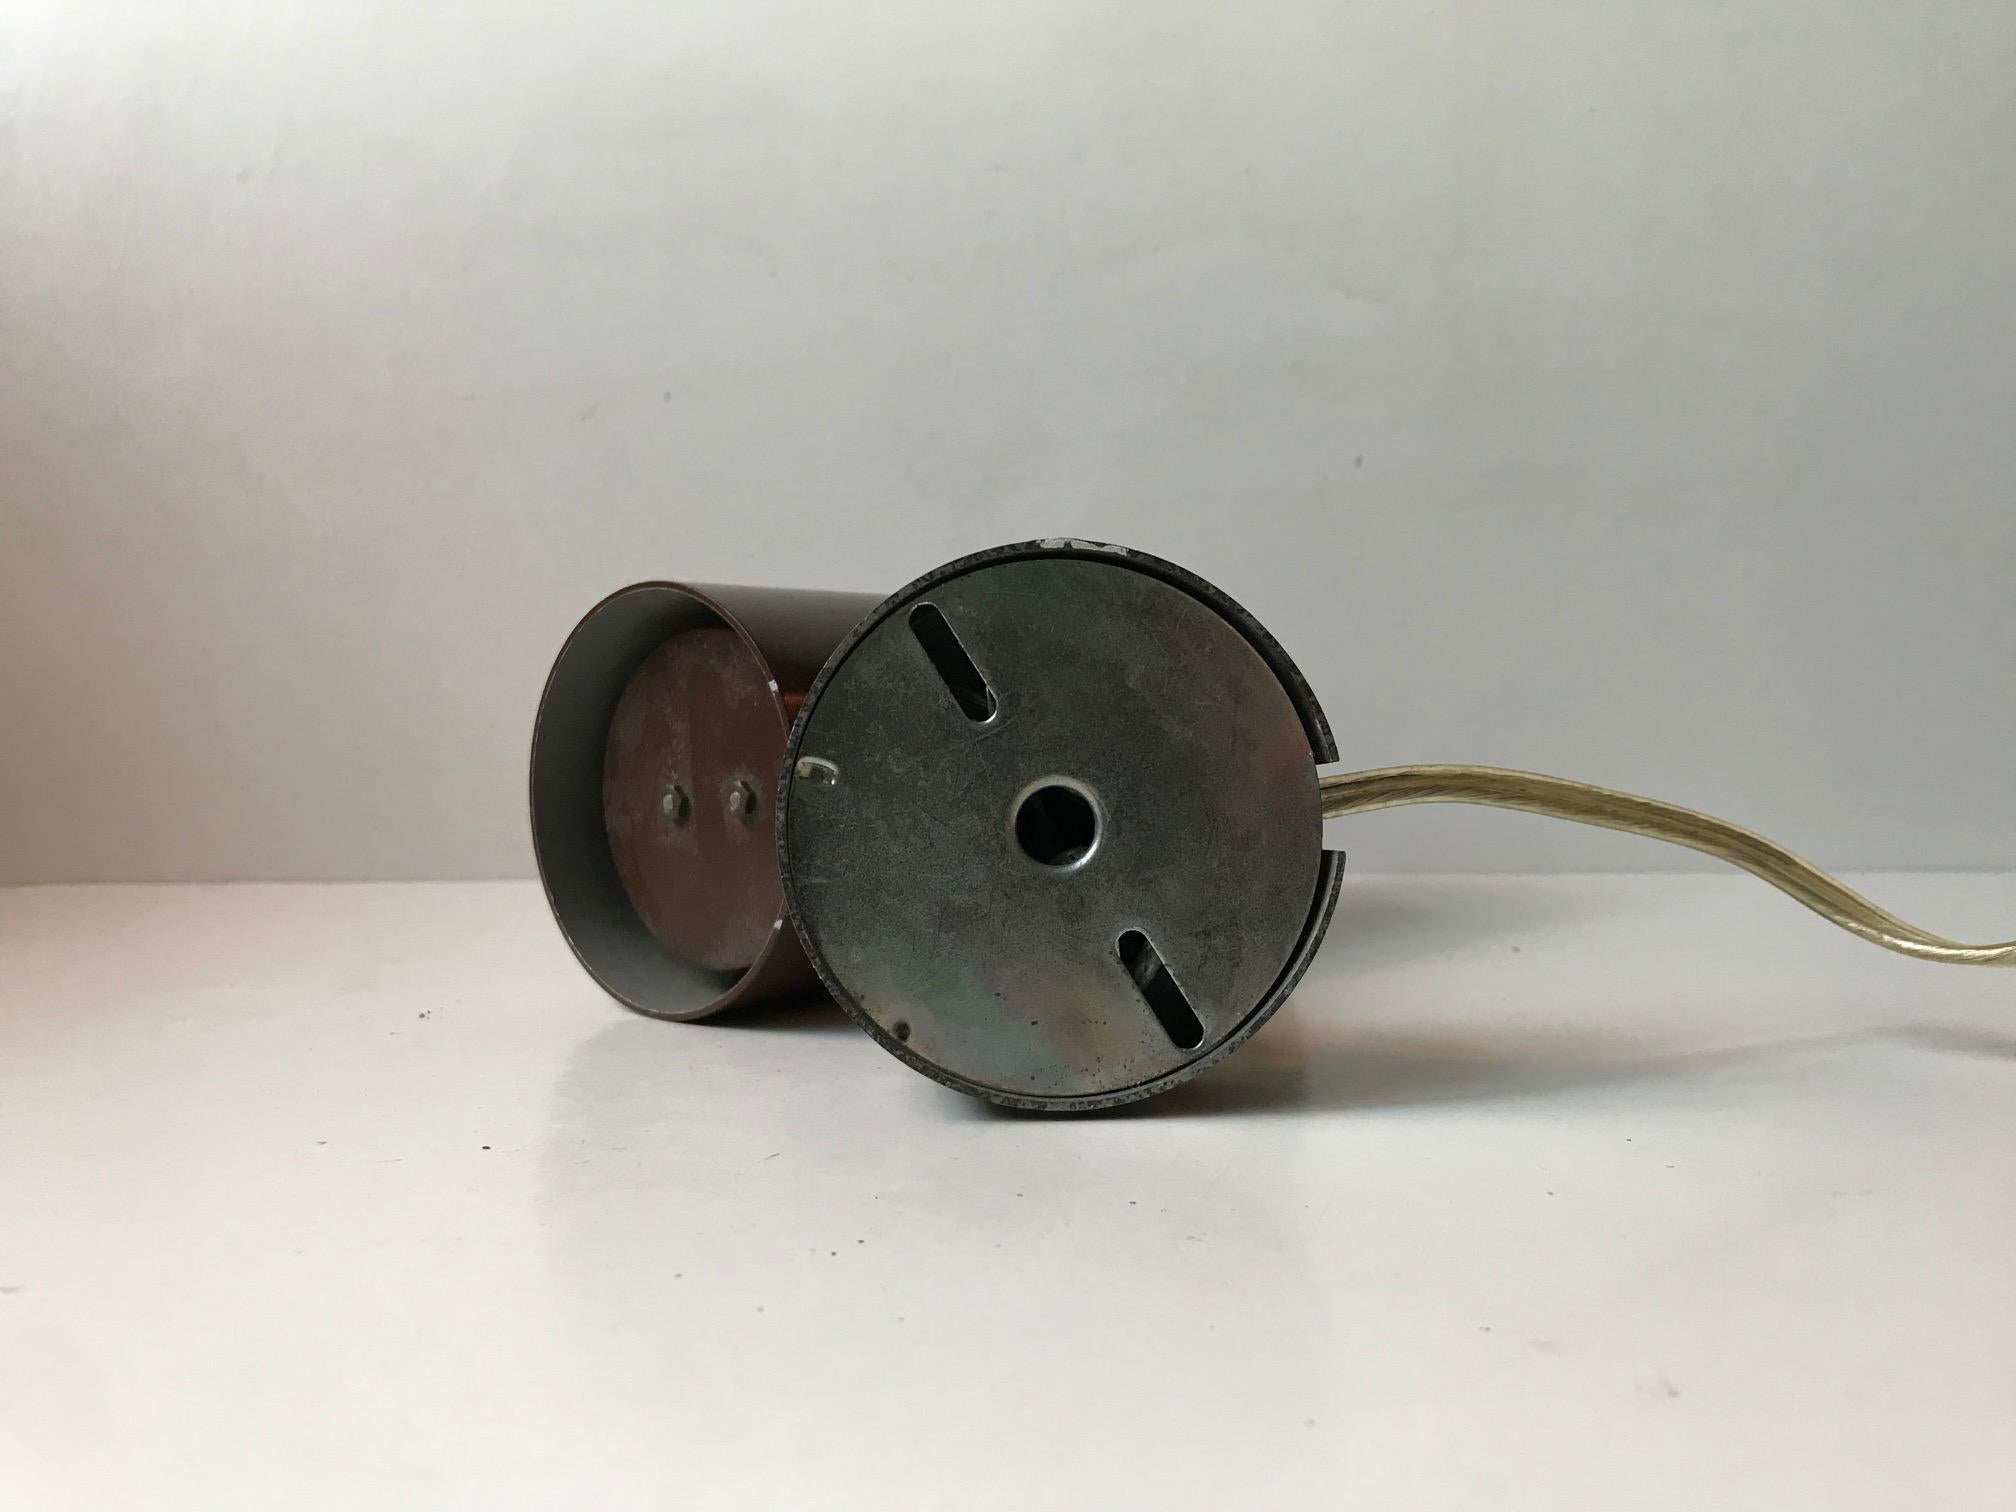 Adjustable Aluminium and Brass Wall Light by Nordisk solar, 1960s For Sale 1